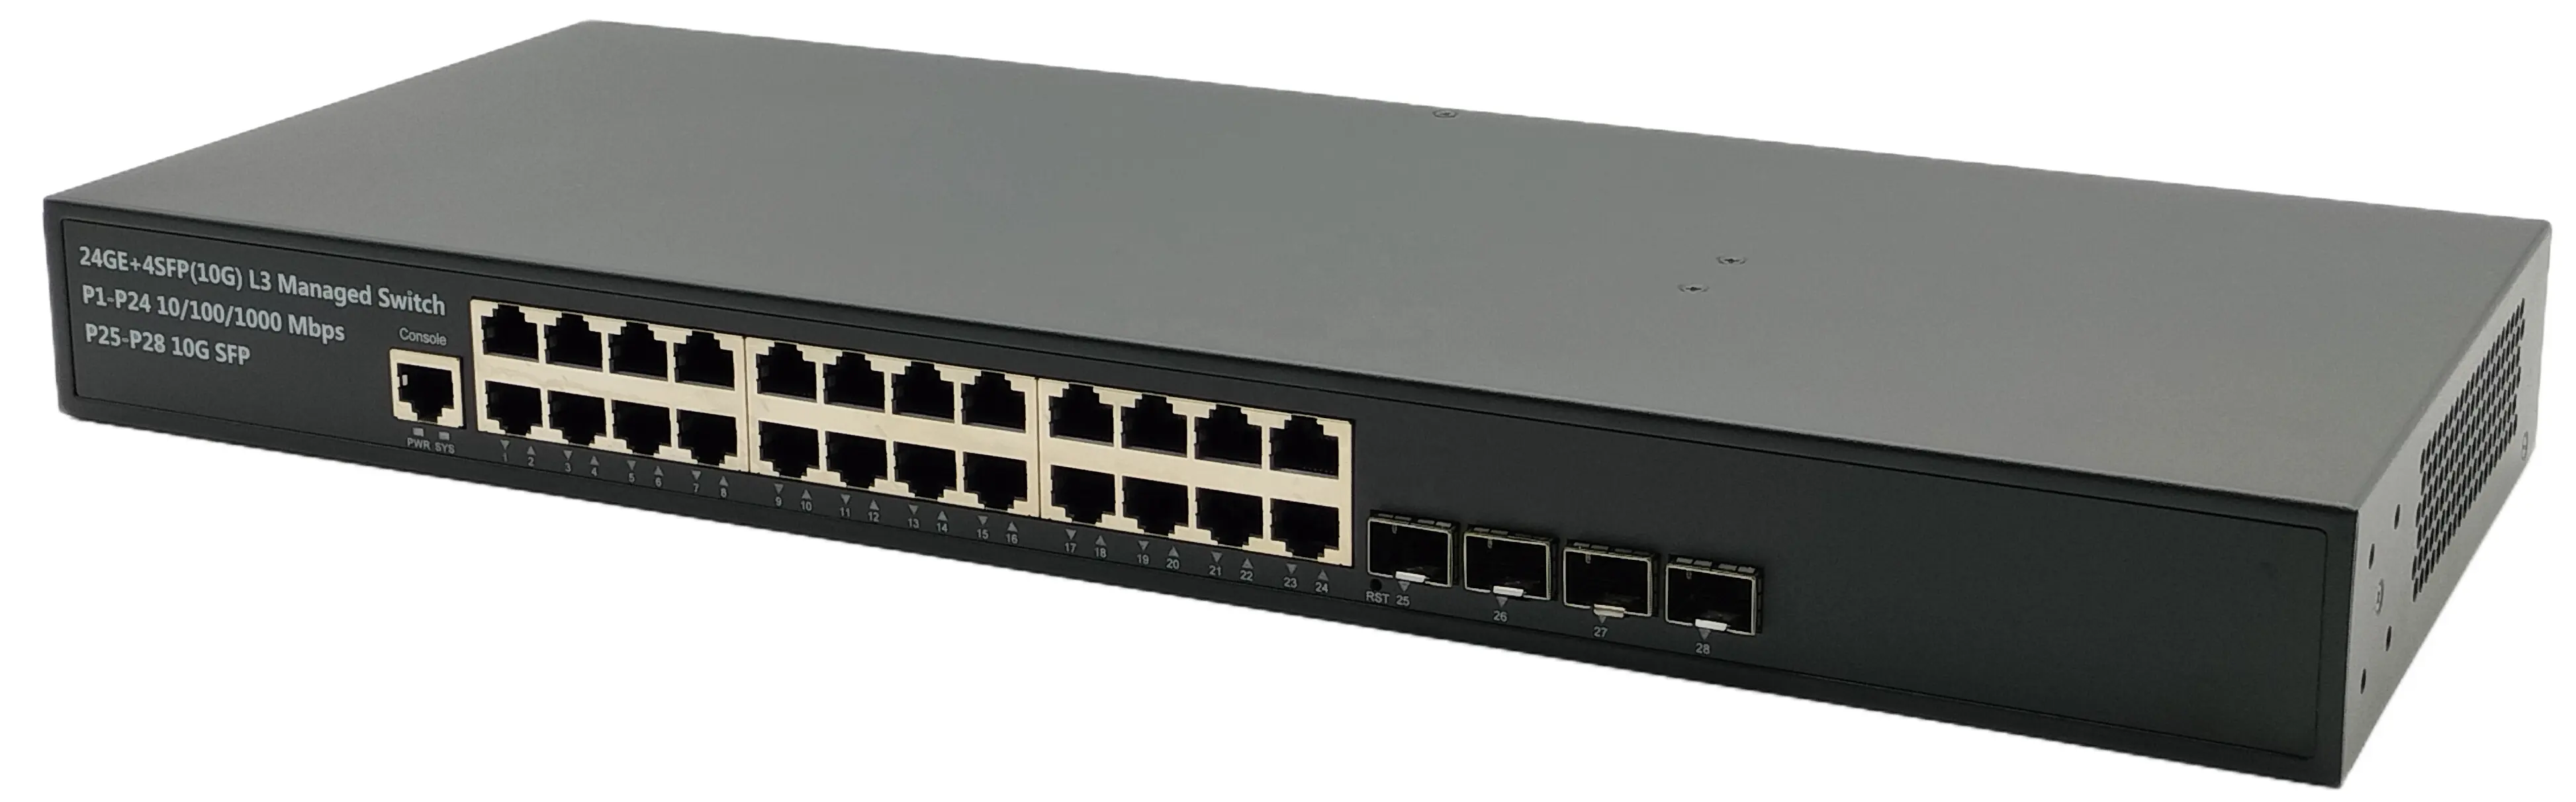 Manageable Vlan Switch Stackable Managed Switch 24 port Managed Switch 10G